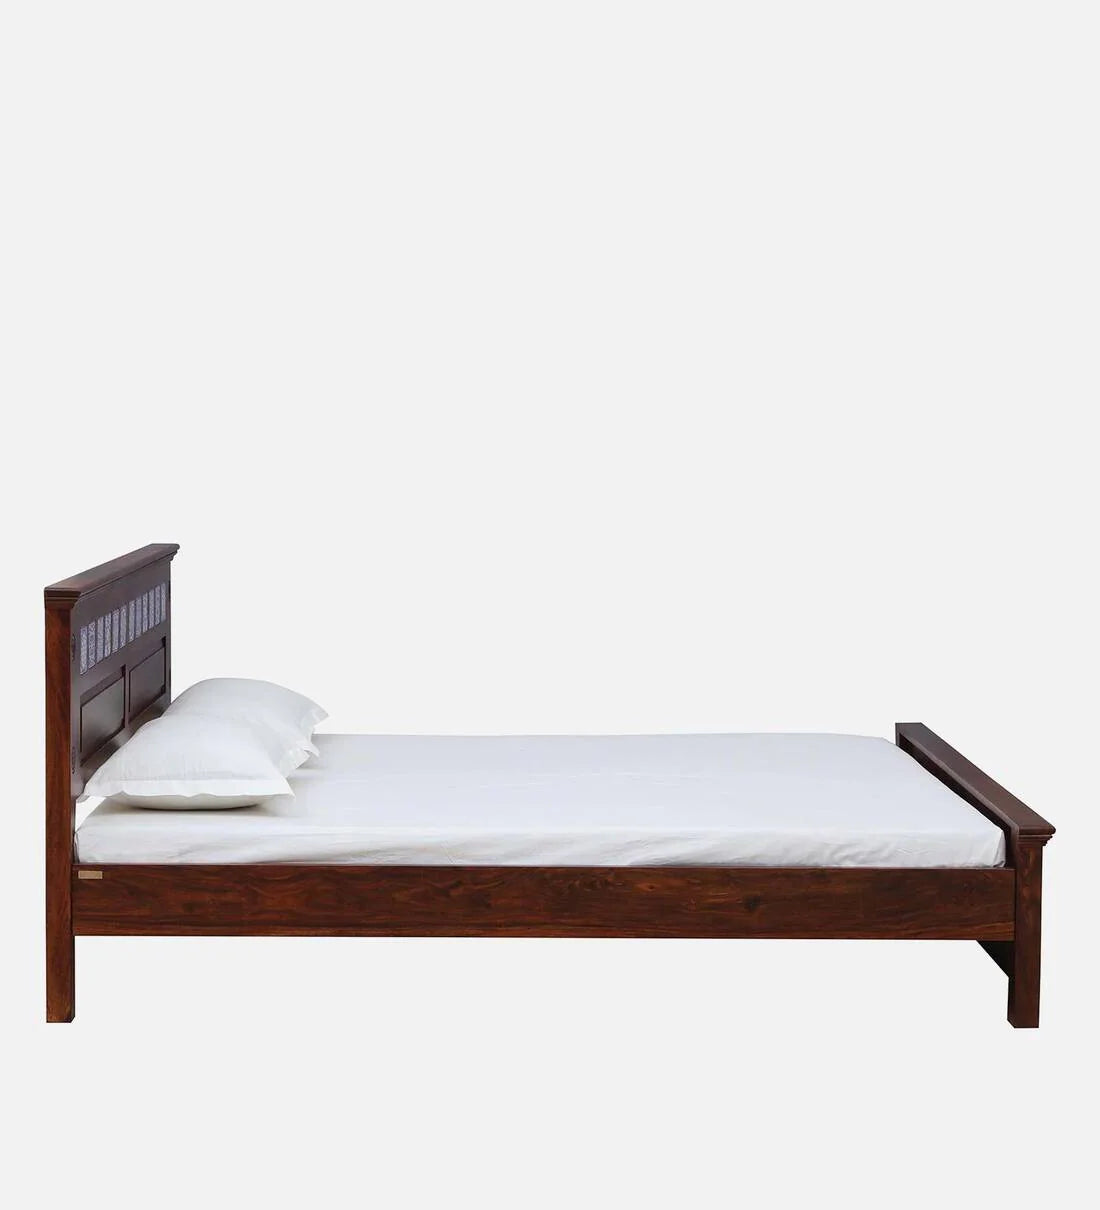 Sheesham Wood King Size Bed In Scratch Resistant Honey Oak Finish with Tiles on Footrest